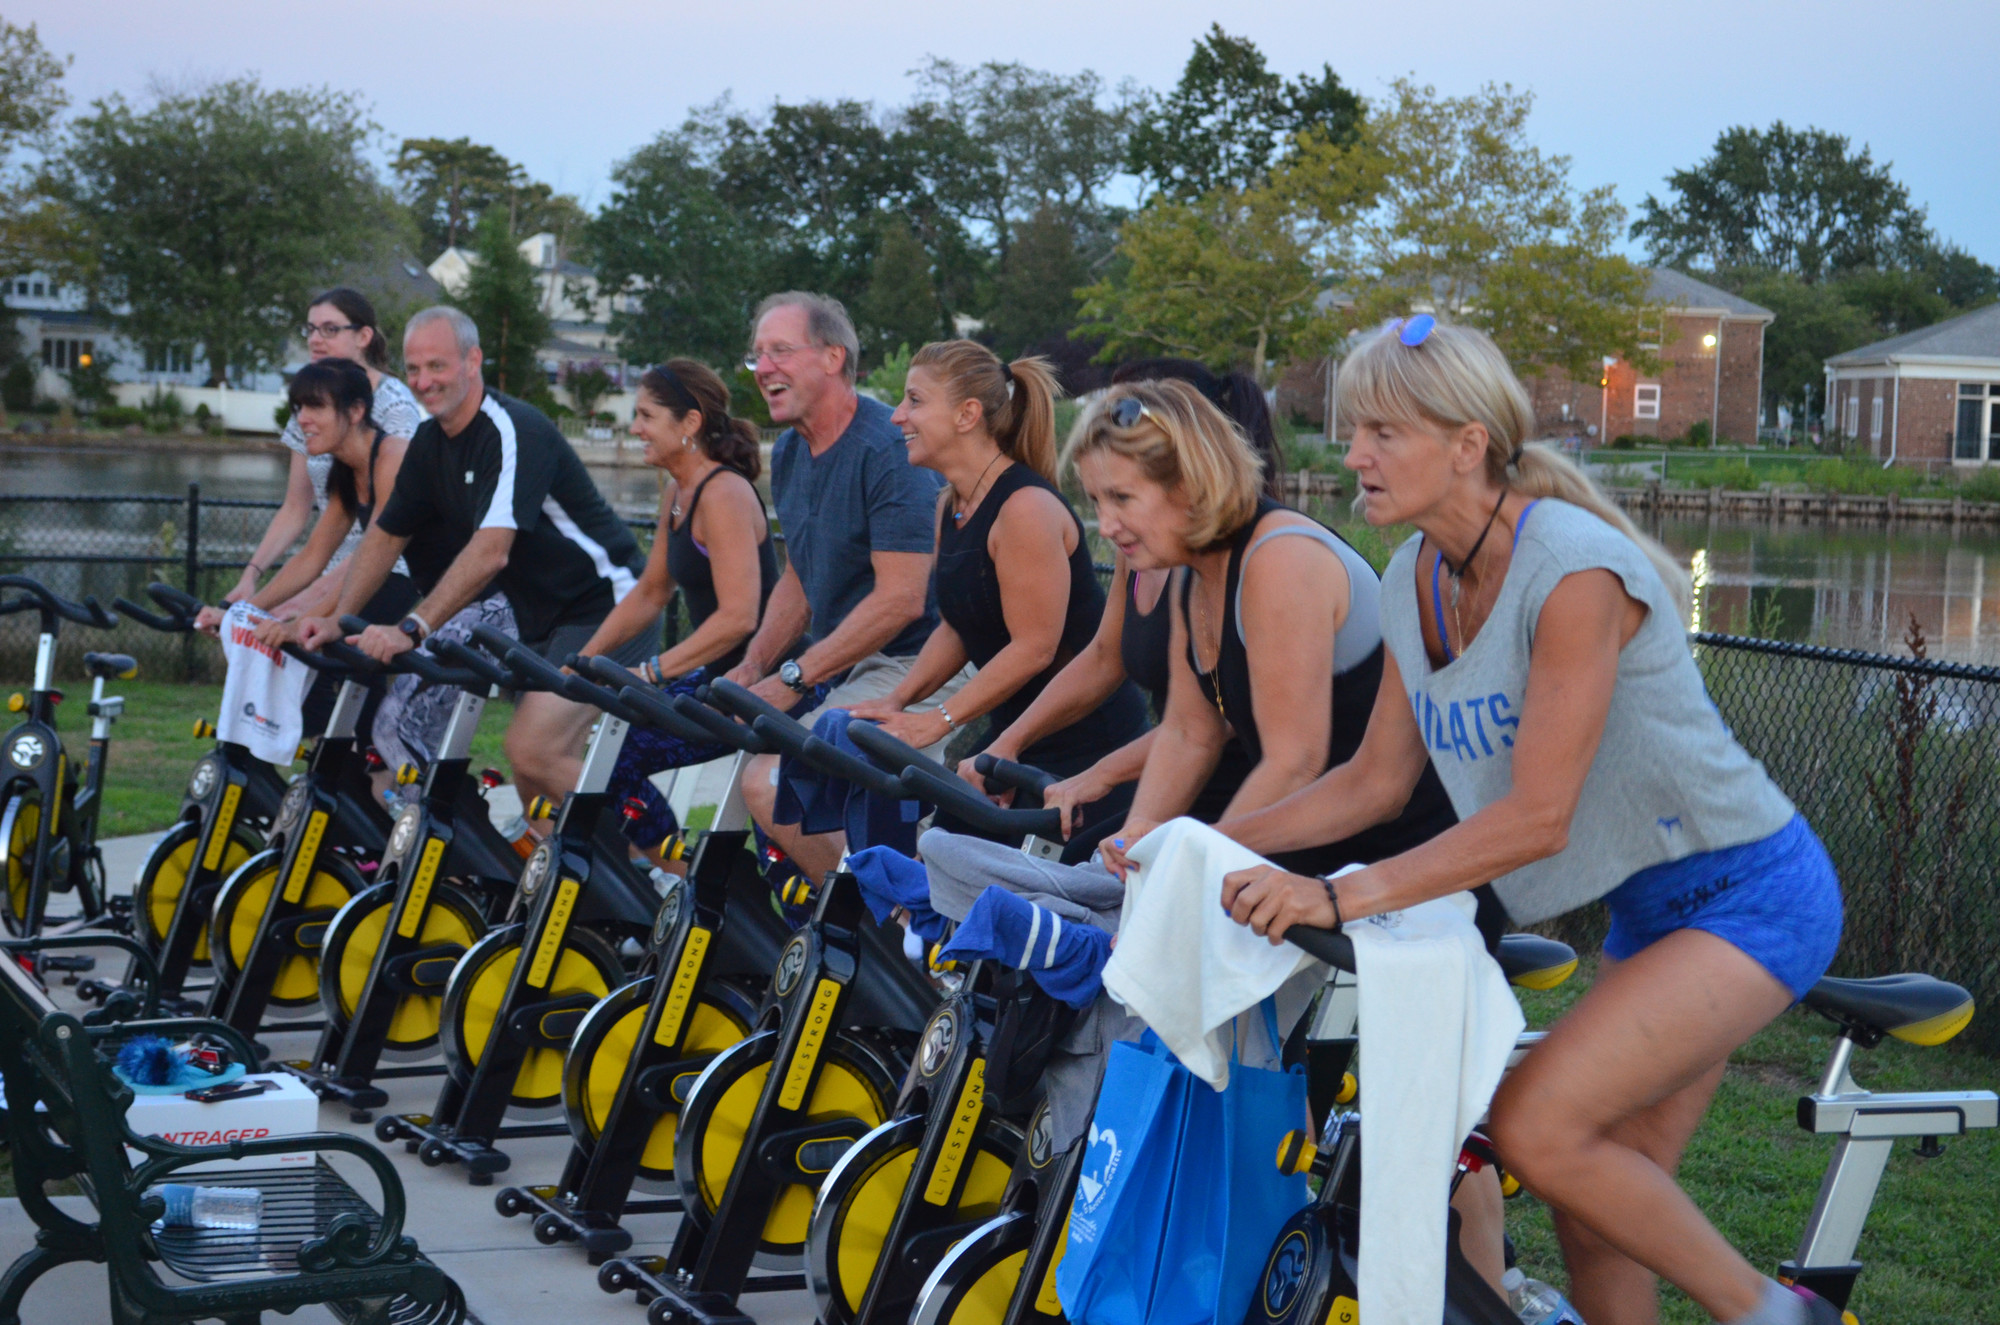 The spinning class was a hit the festival in Oxbow Park.